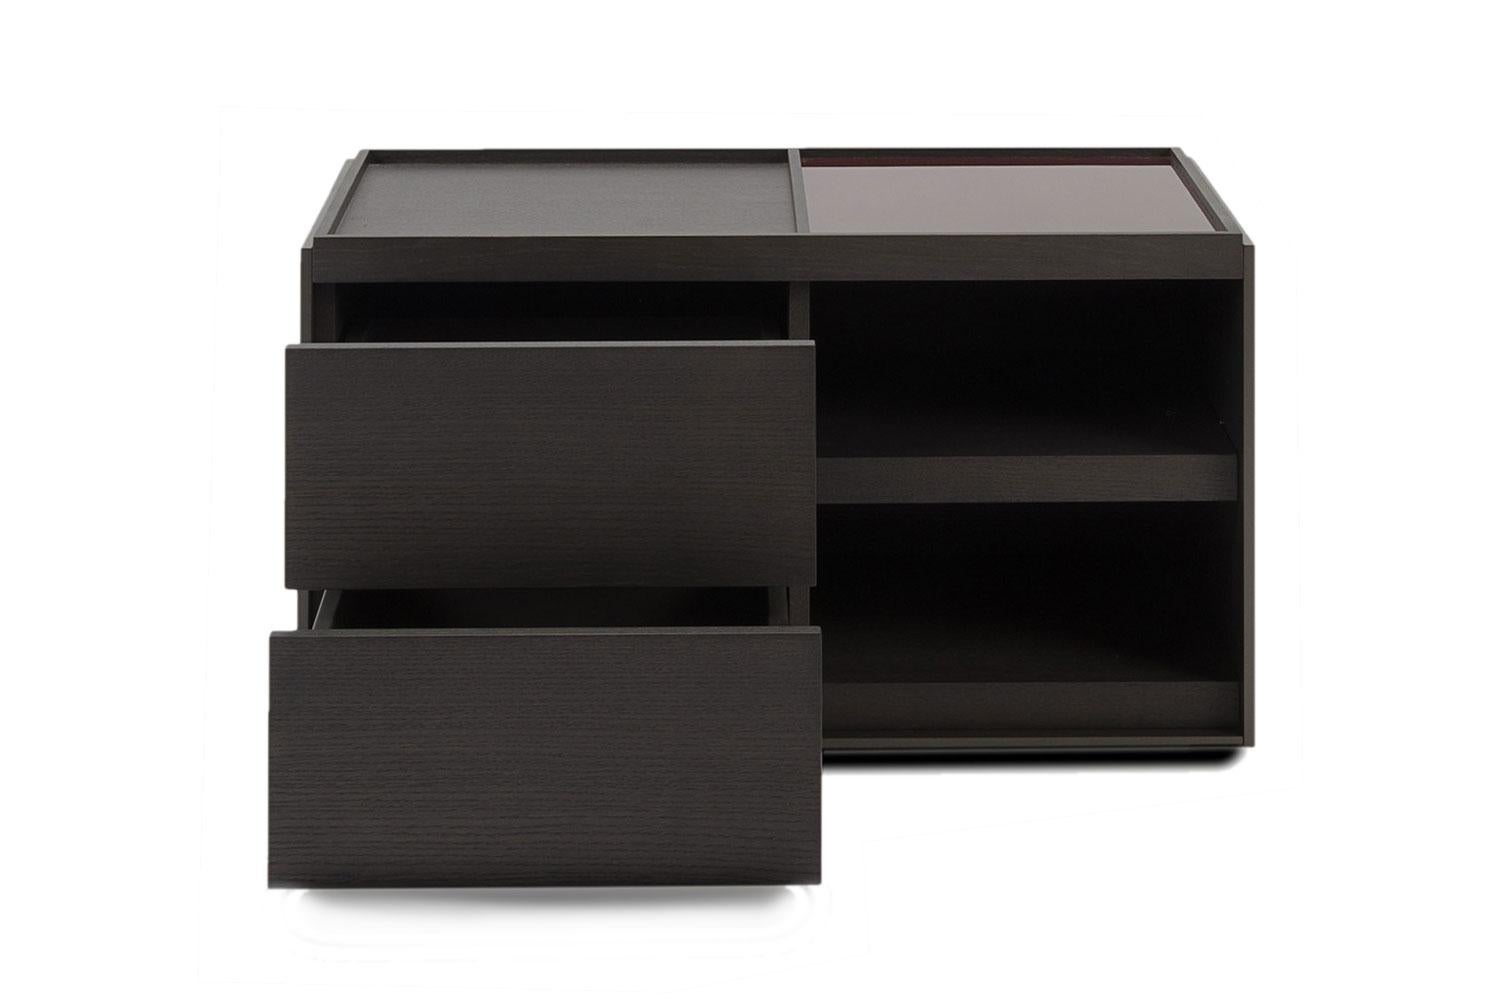 Surface storage unit side table By B&B Italia

This side table in grey oak wood from B&B Italia has two drawers and open compartments. A back lacquered plum colored piece of glass on one side of the surface and grey oak wood on the other. 
This